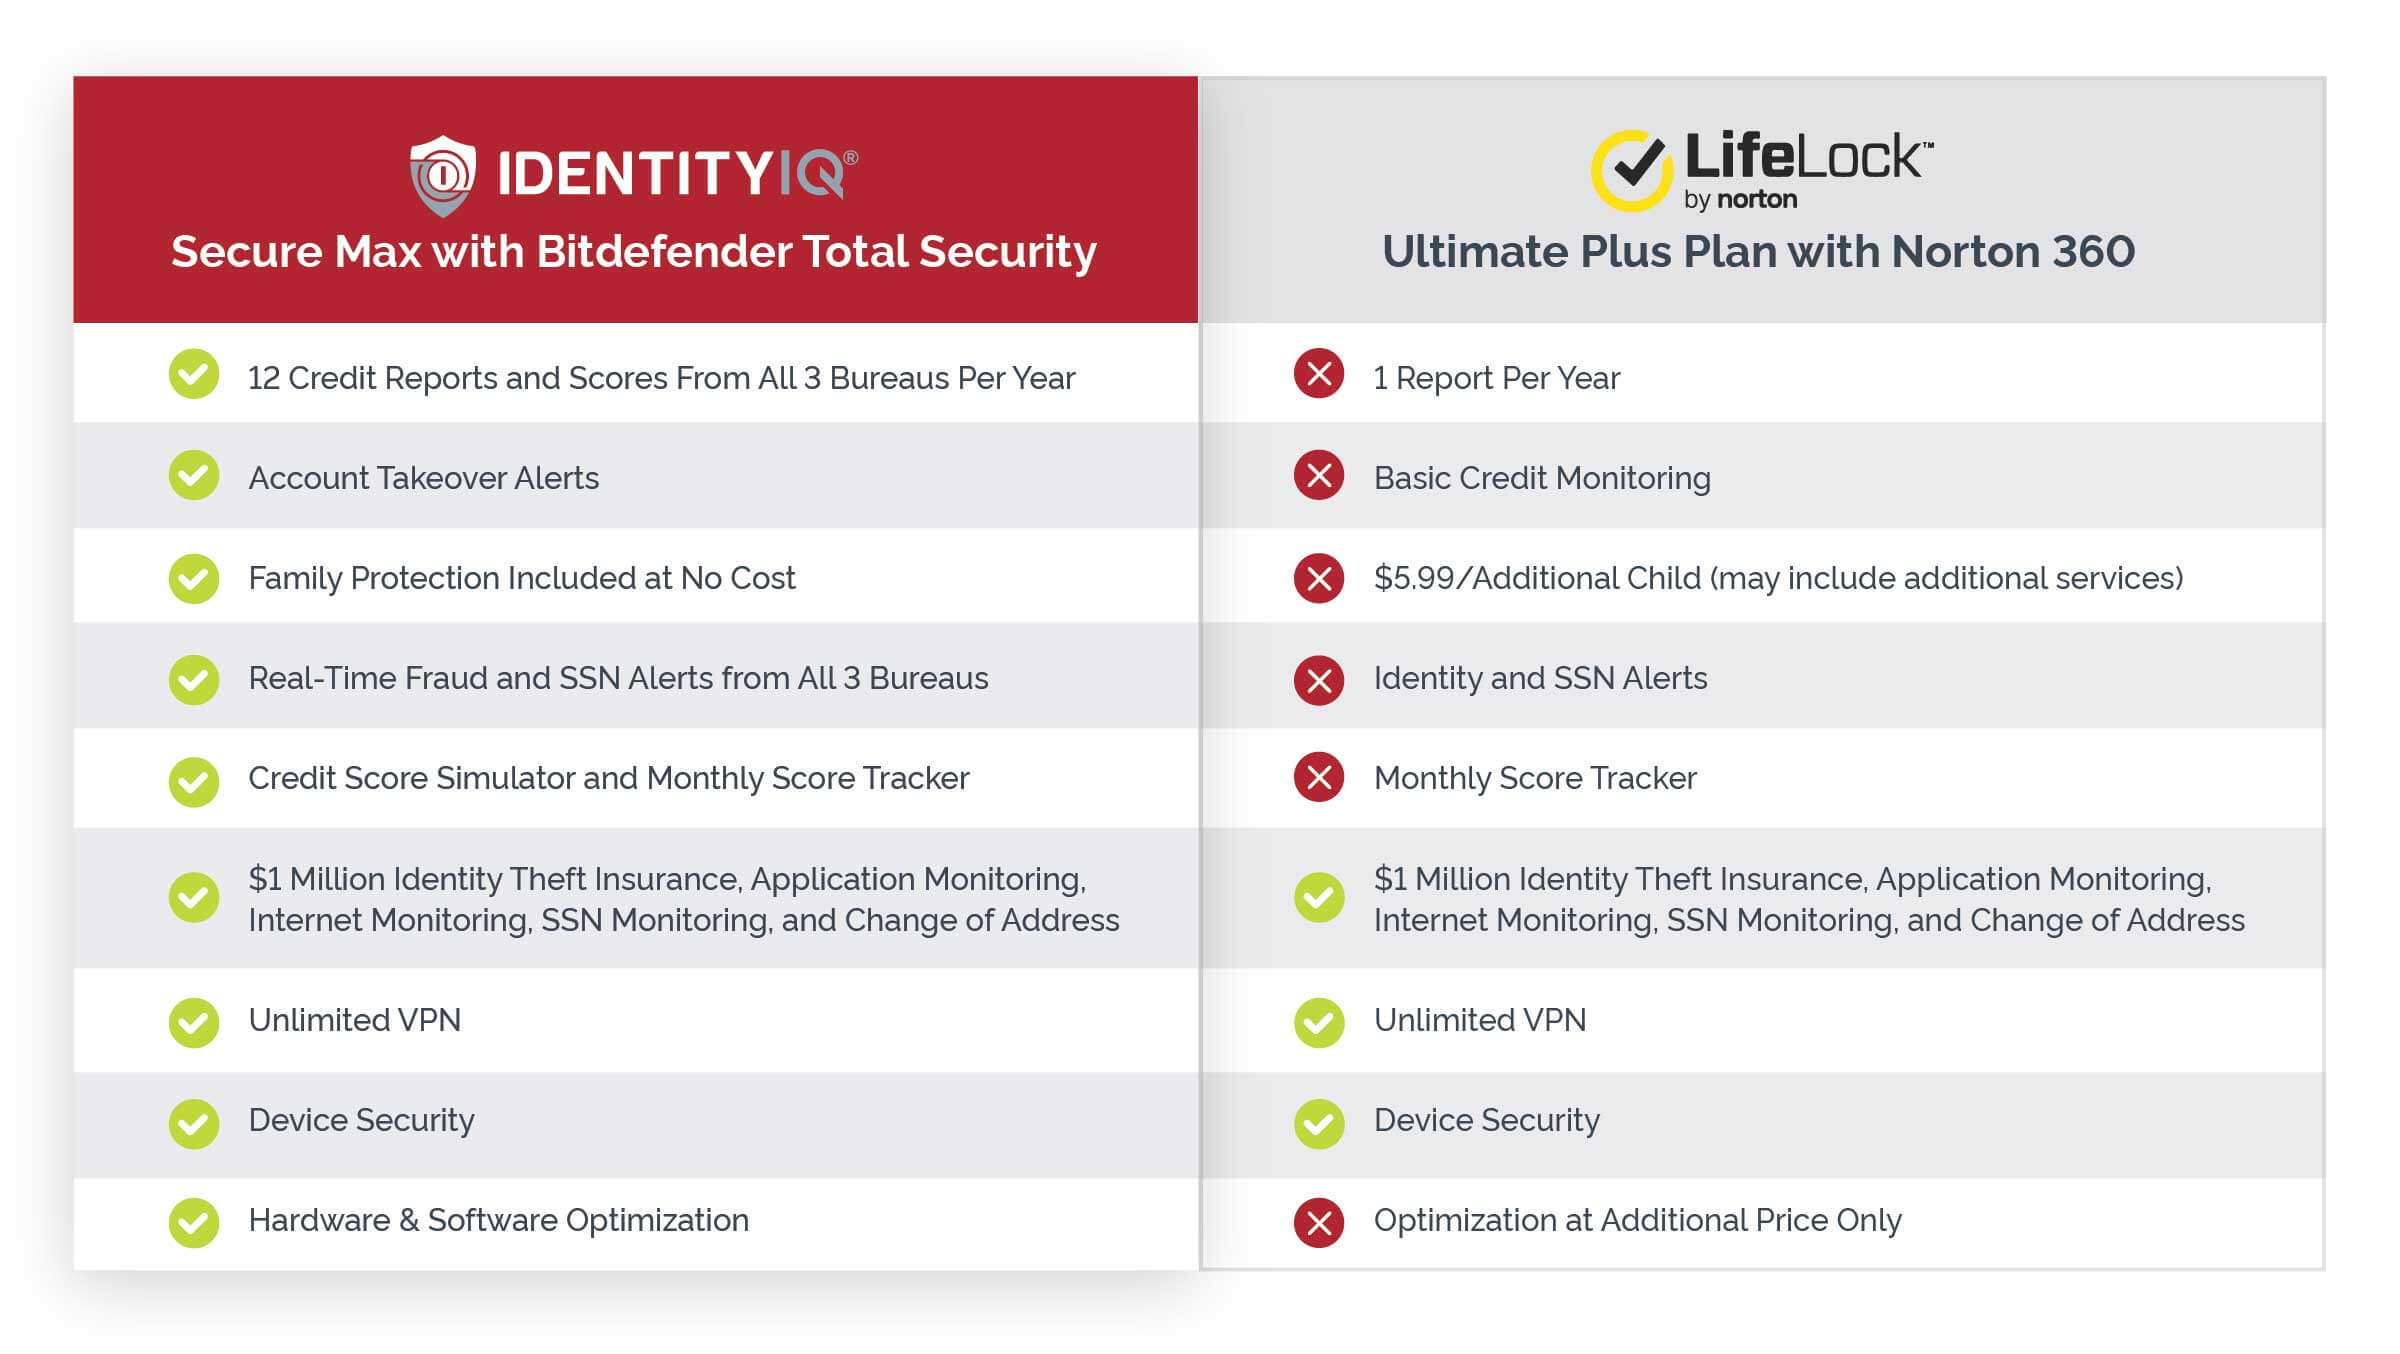 Price plans for IdentityIQ and Lifelock.